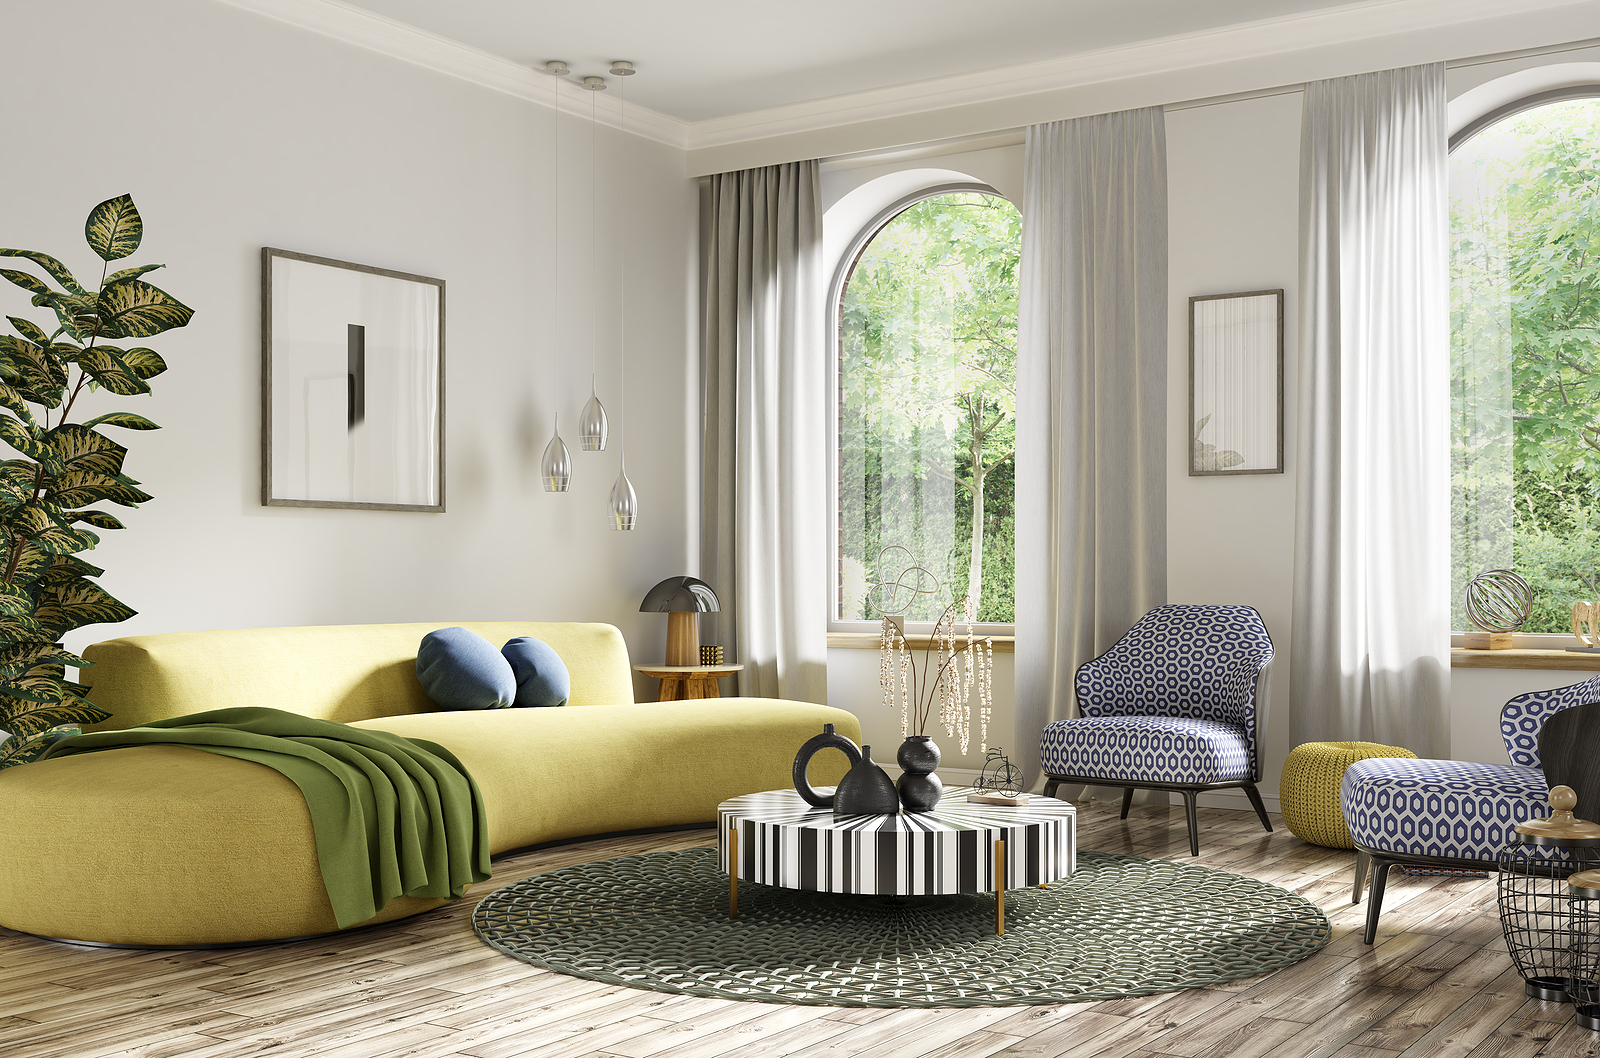 Modern art deco interior design of apartment, living room with yellow sofa, classical armchairs. Accent coffee table. Home interior with rug. 3d rendering